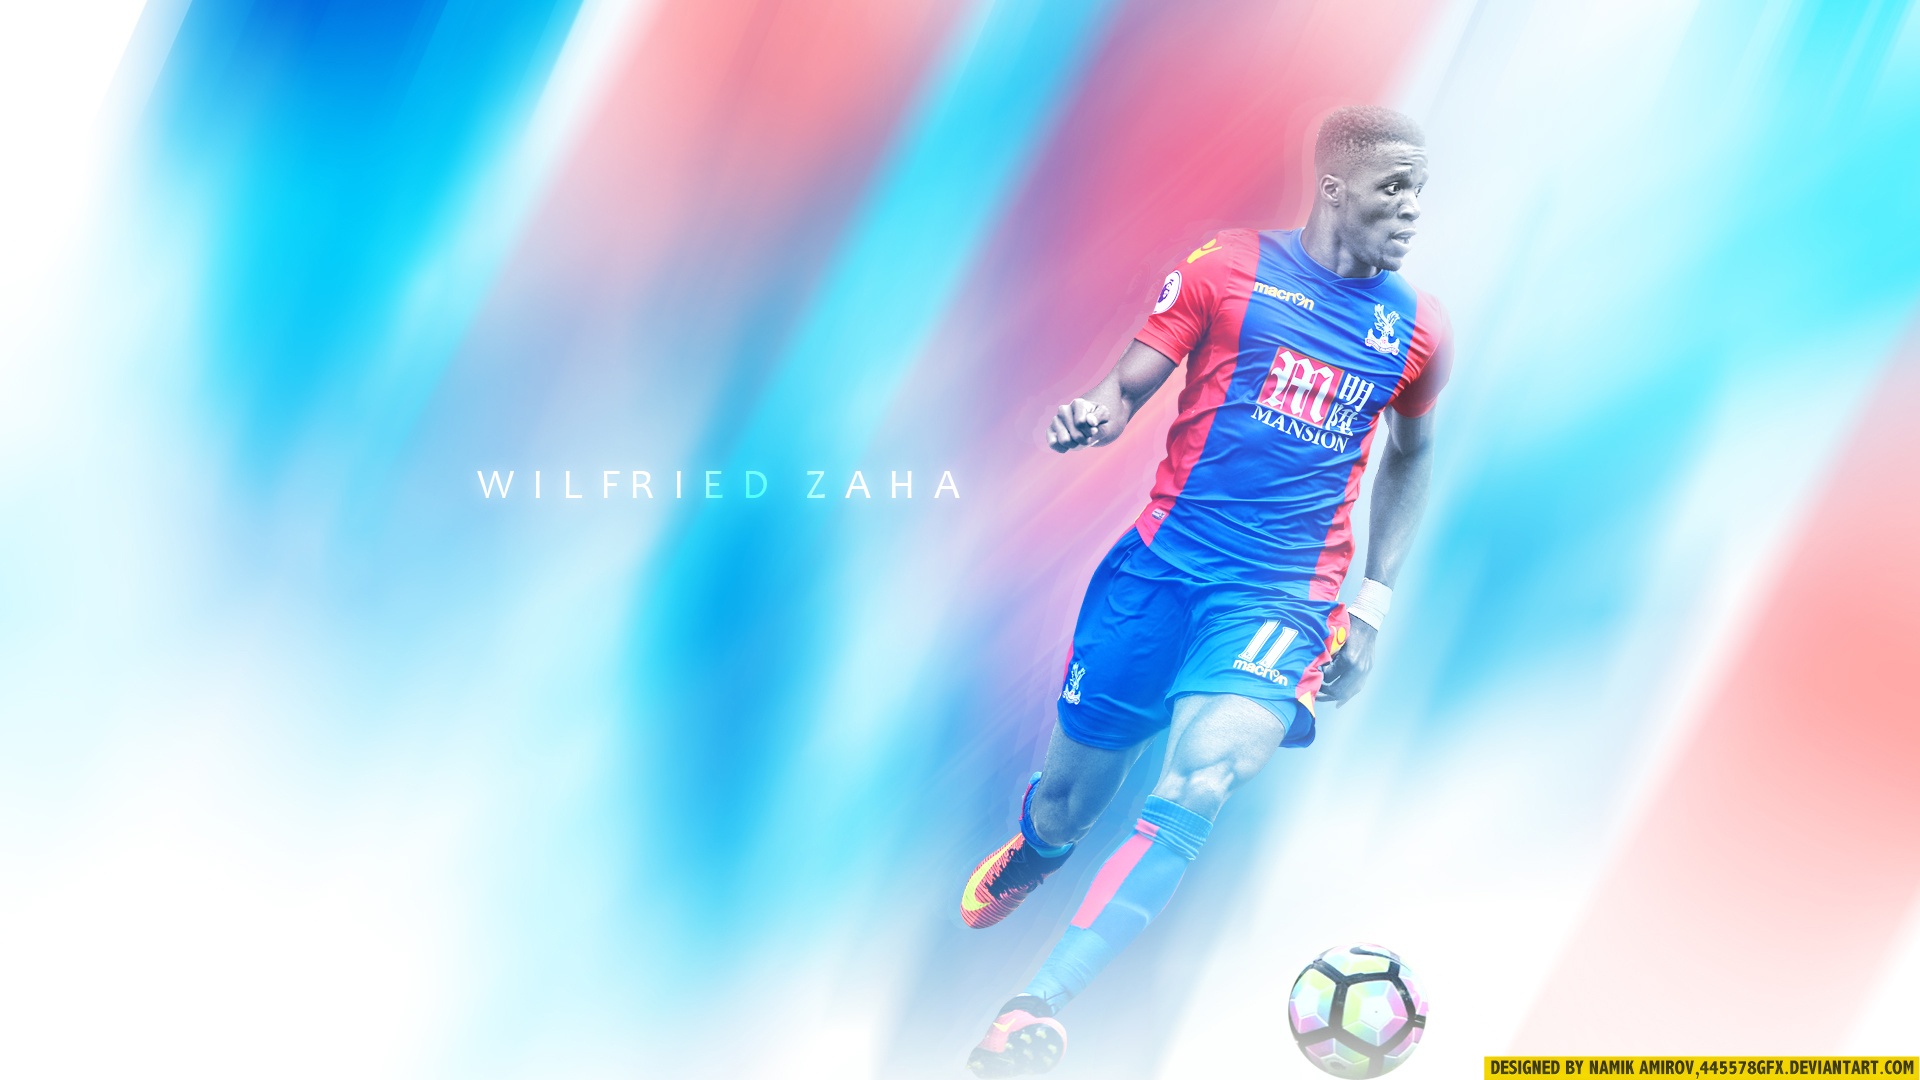 Crystal Palace F C wallpaper for desktop, download free Crystal Palace F C picture and background for PC